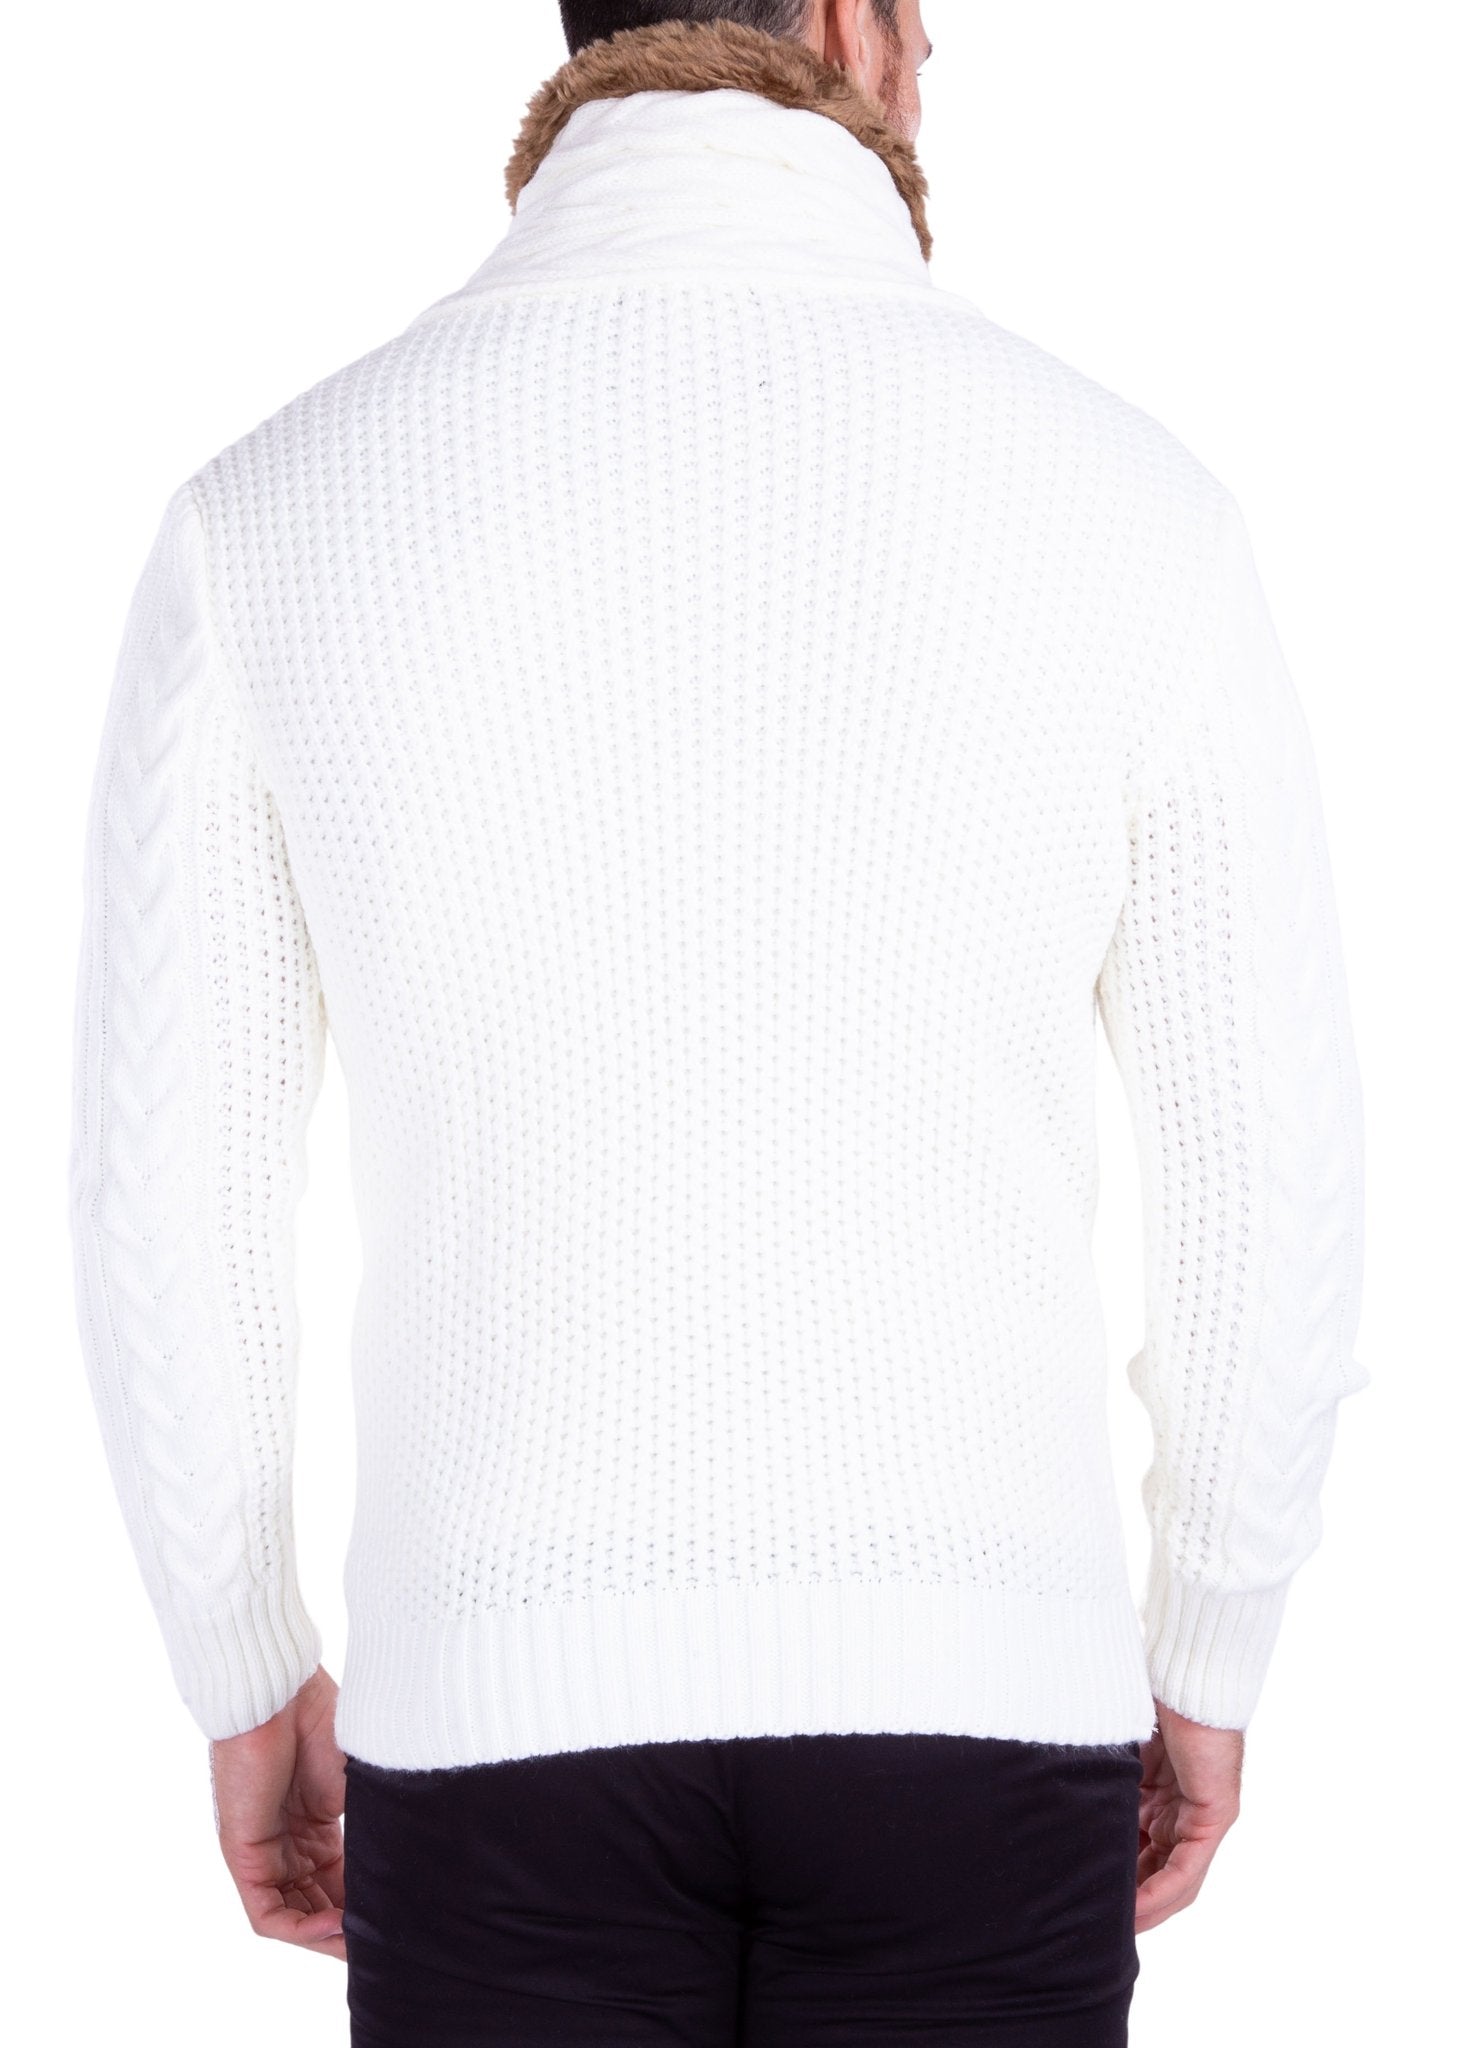 Men's White Button Up Fur-Lined Collar Sweater